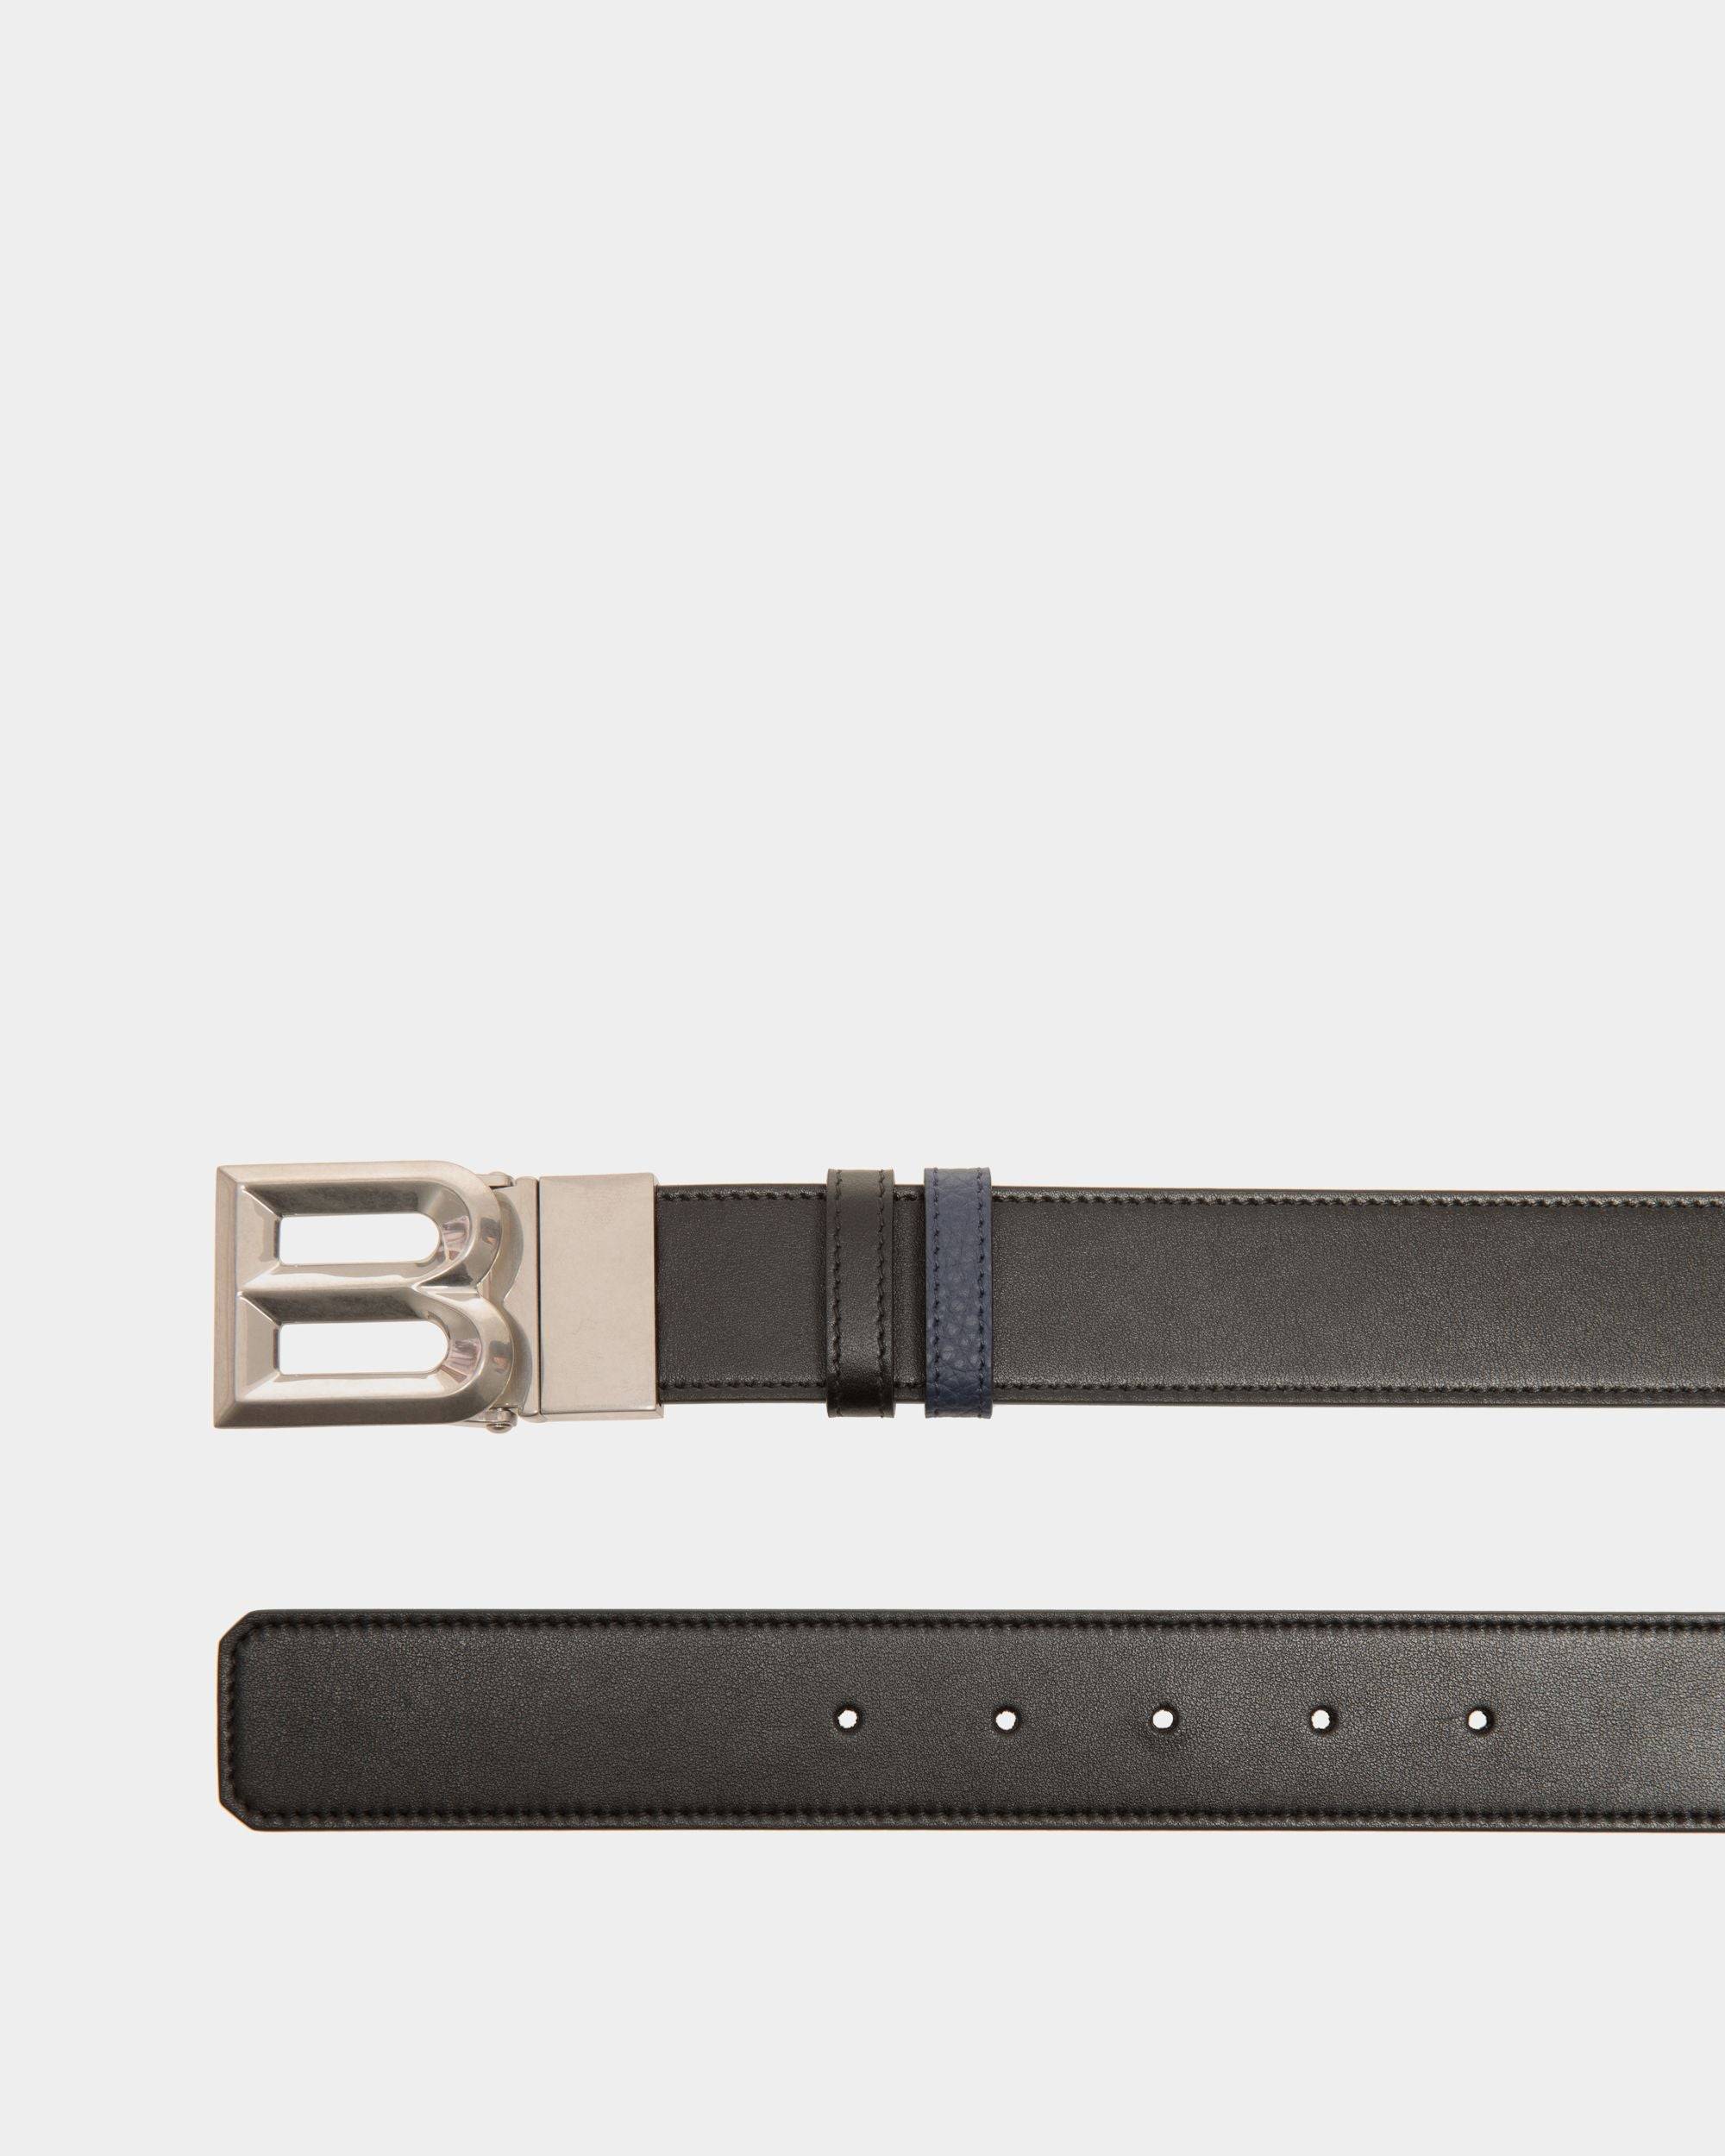 B Bold 35mm | Men's Reversible And Adjustable Belt in Black And Marine Leather | Bally | Still Life Detail